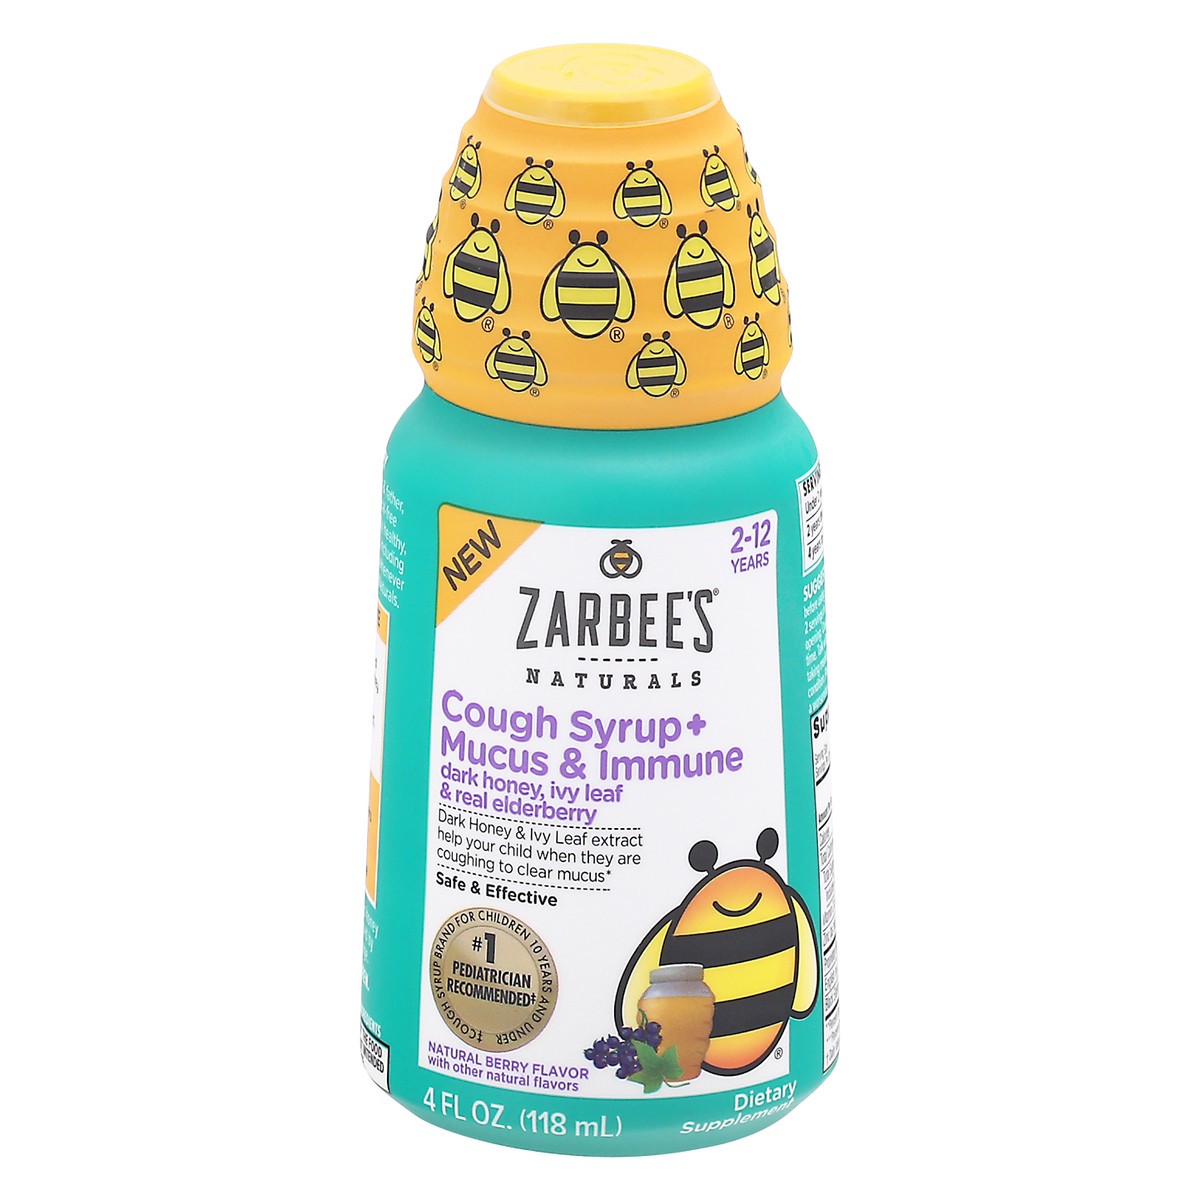 slide 1 of 9, Zarbee's Naturals Naturals 2-12 Years Natural Berry Flavor Cough Syrup + Mucus & Immune 4 fl oz Bottle, 4 fl oz